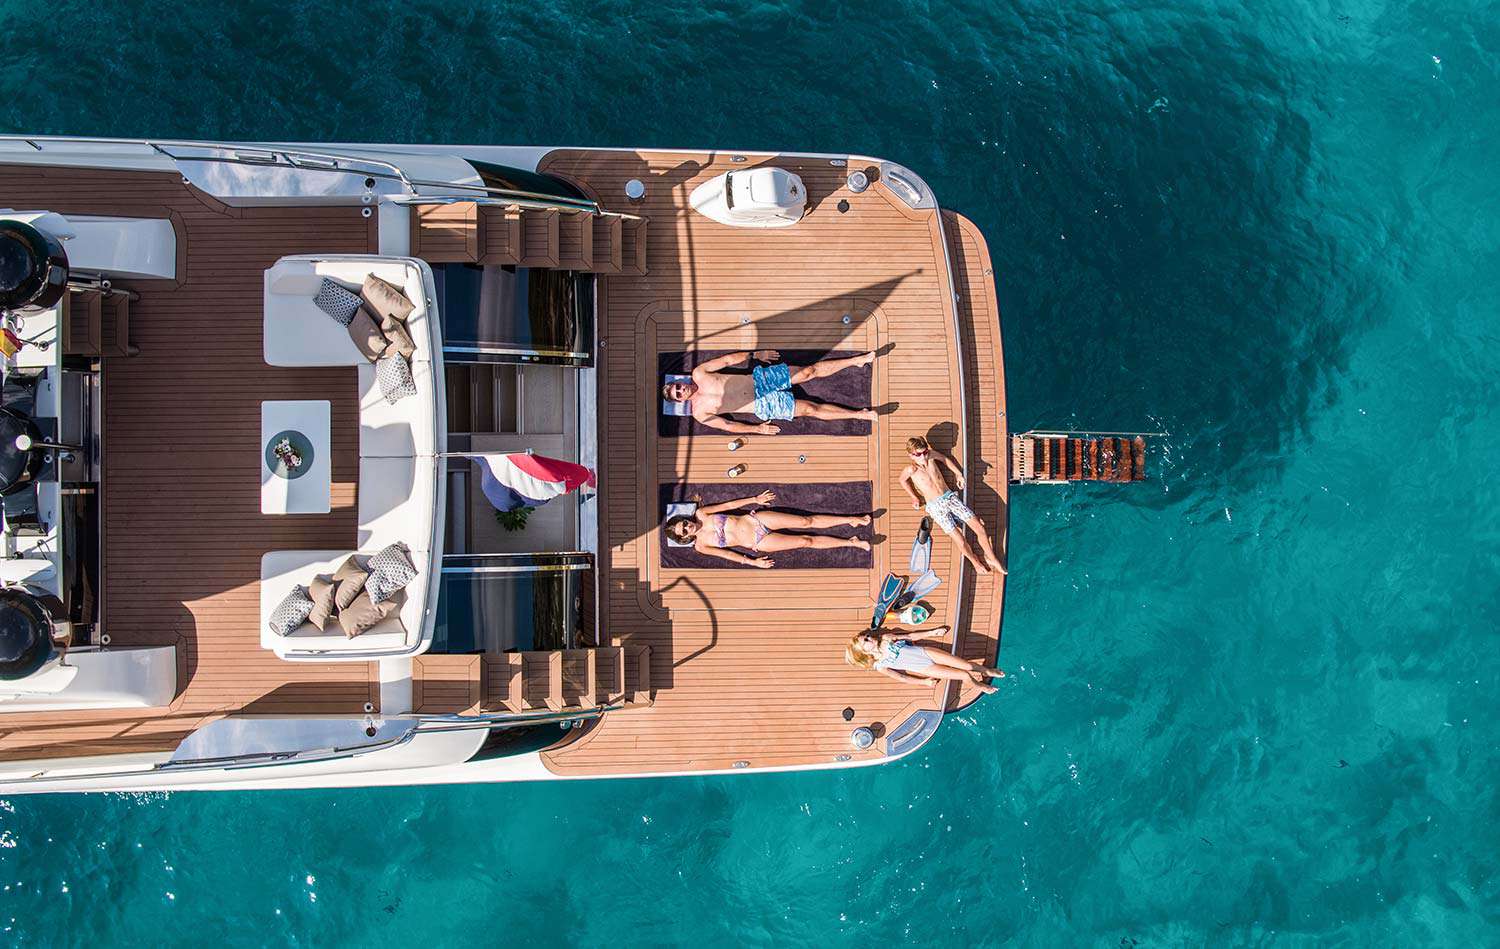 Wim van der Valk Yachts-The largest selection of Van Der Valk luxury super yachts available for sale and charter, all in our database.